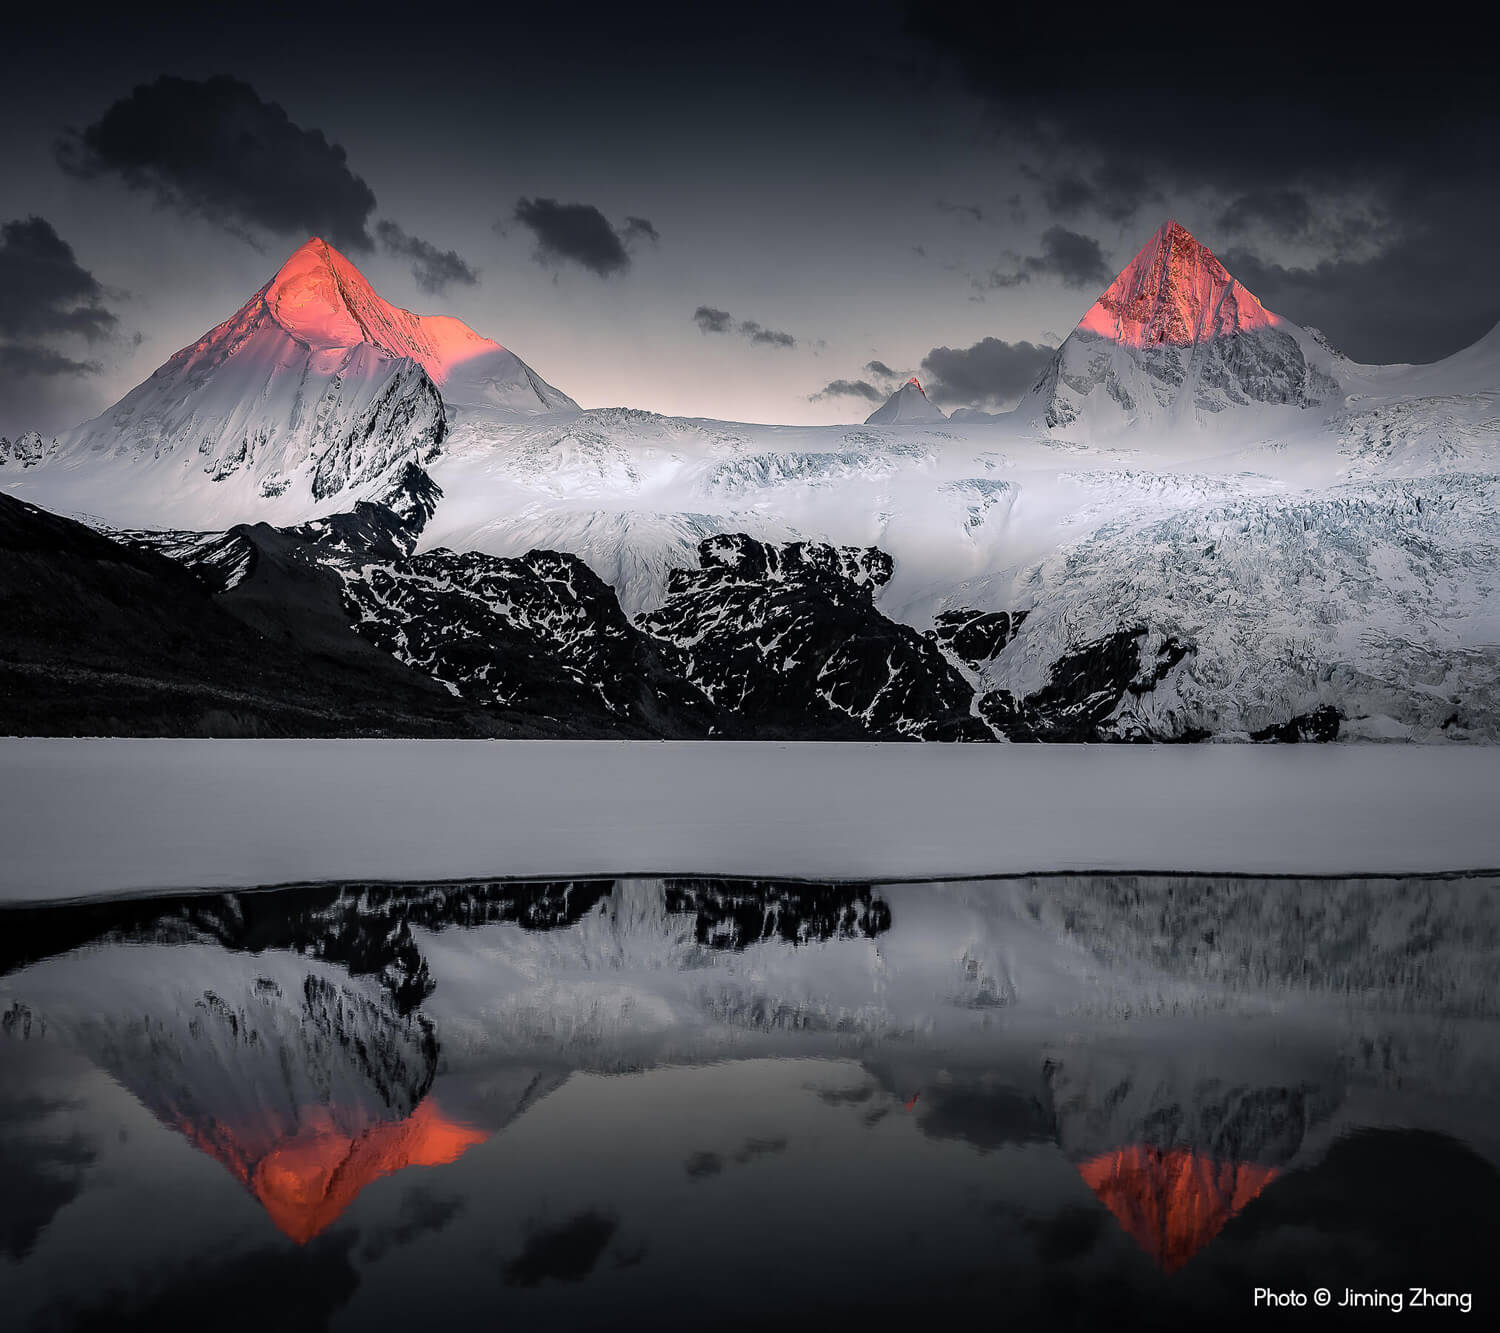 Two snow-covered mountain peaks bathed in the warm glow of sunset, with their orange-hued reflections mirrored in the calm waters of a lake below.